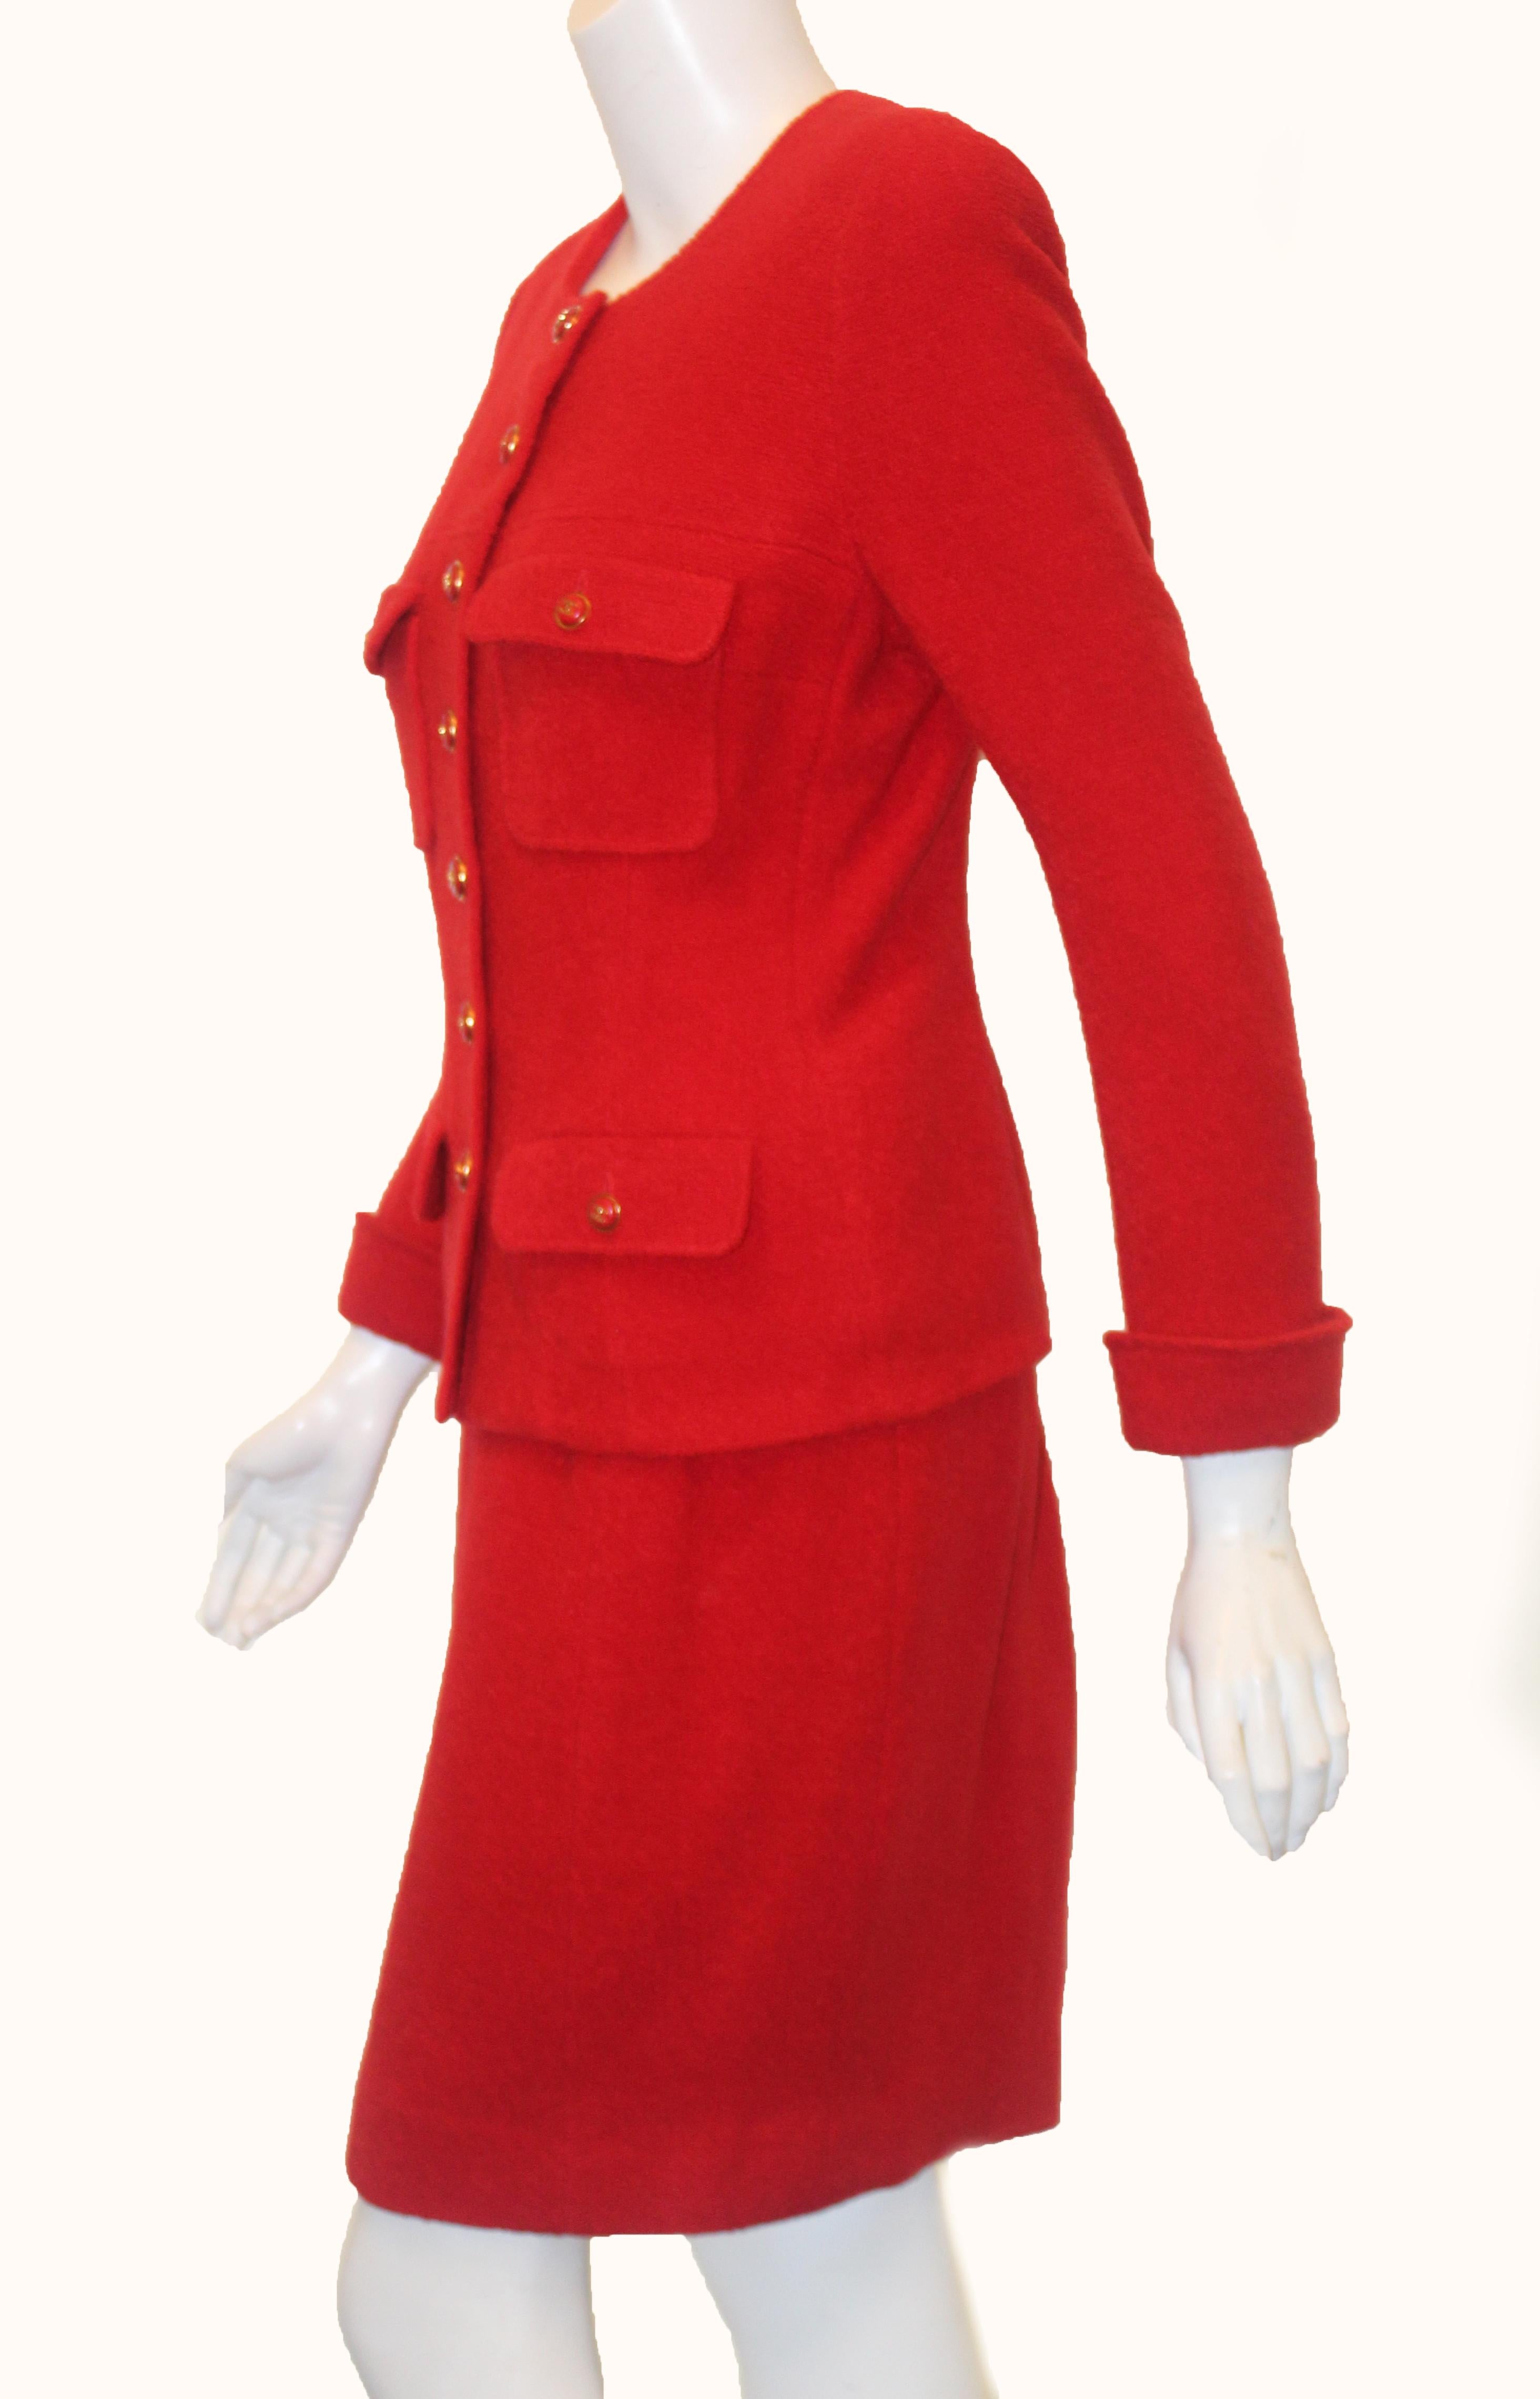 Women's Chanel Red Wool & Silk Four Flap Pockets  Skirt Suit From '95 Fall Collection For Sale